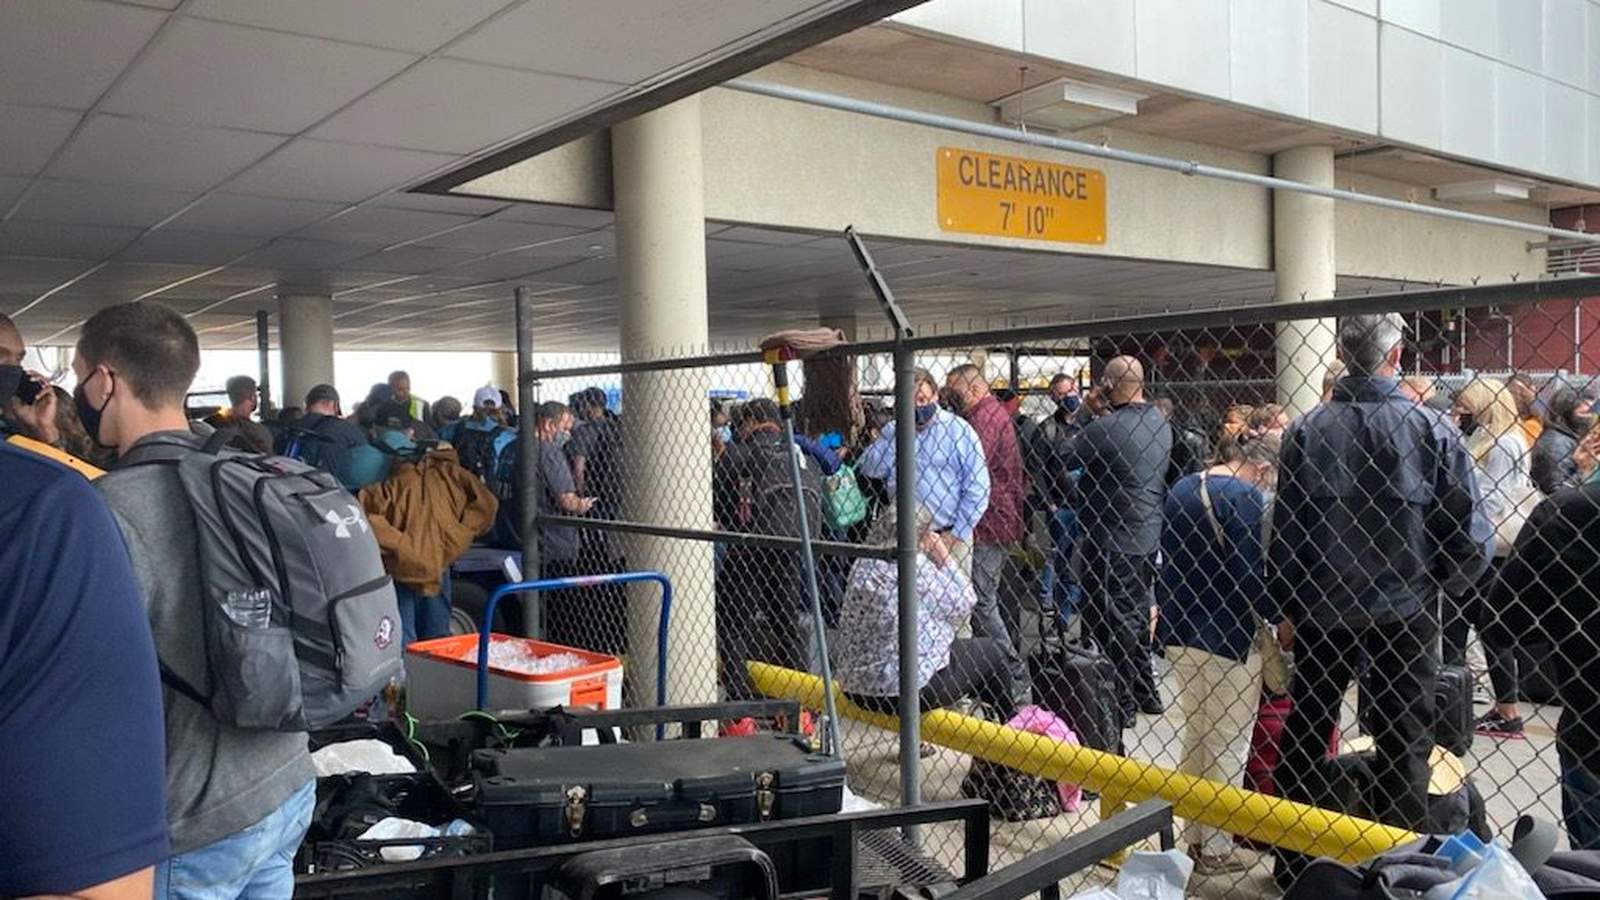 San Antonio International Airport will be locked after shooting, SAPD says